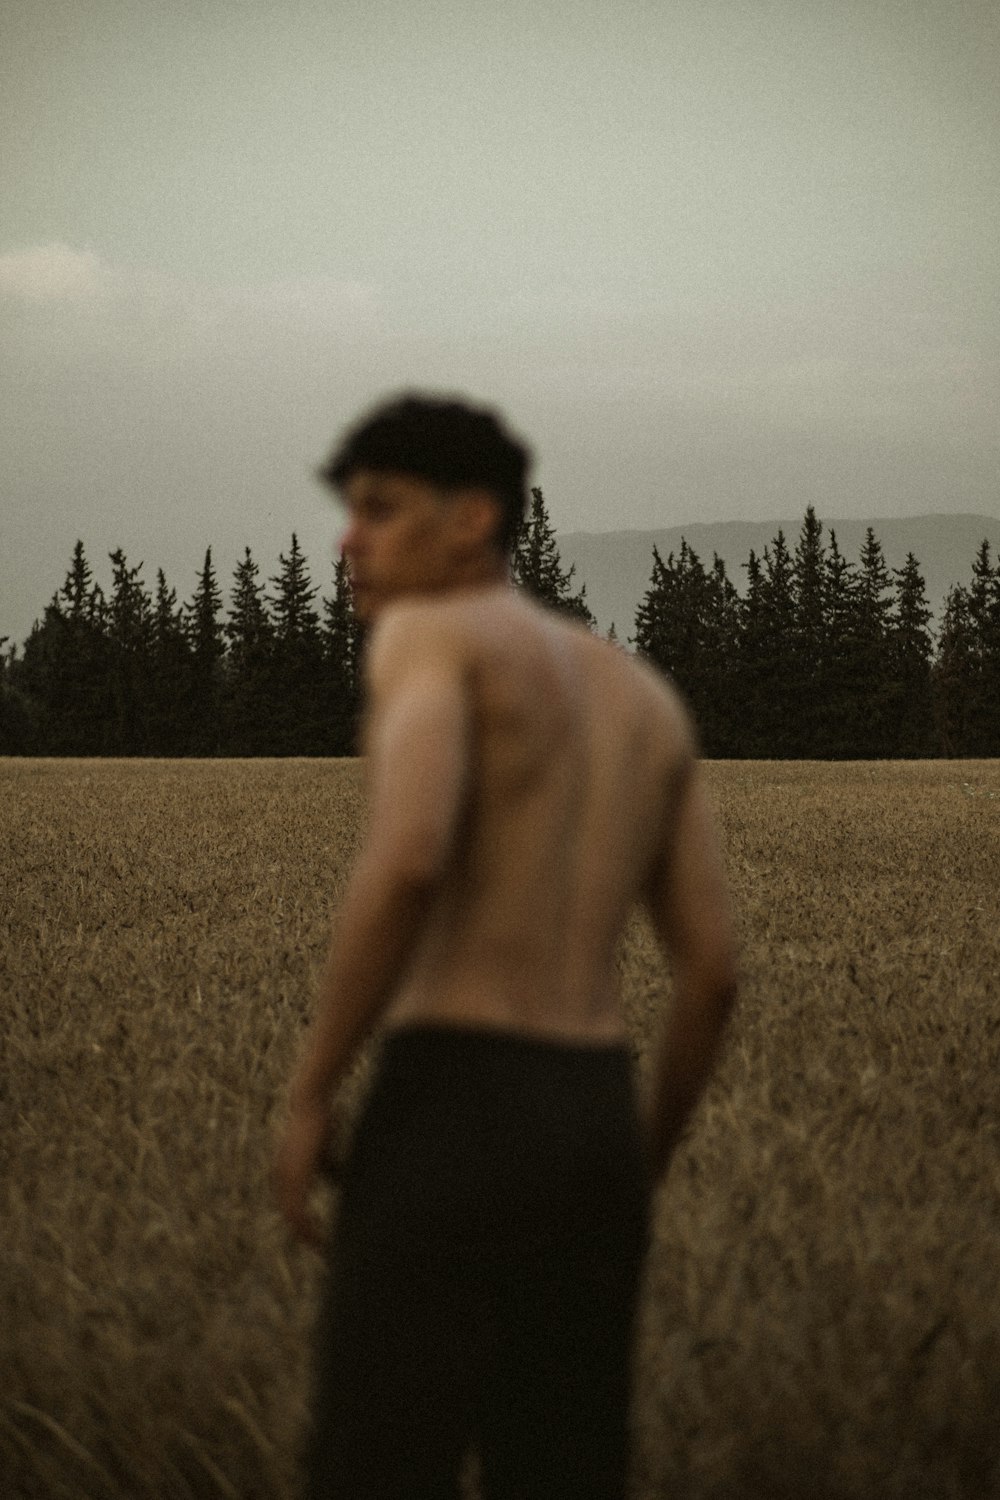 topless man in black shorts standing on brown grass field during daytime